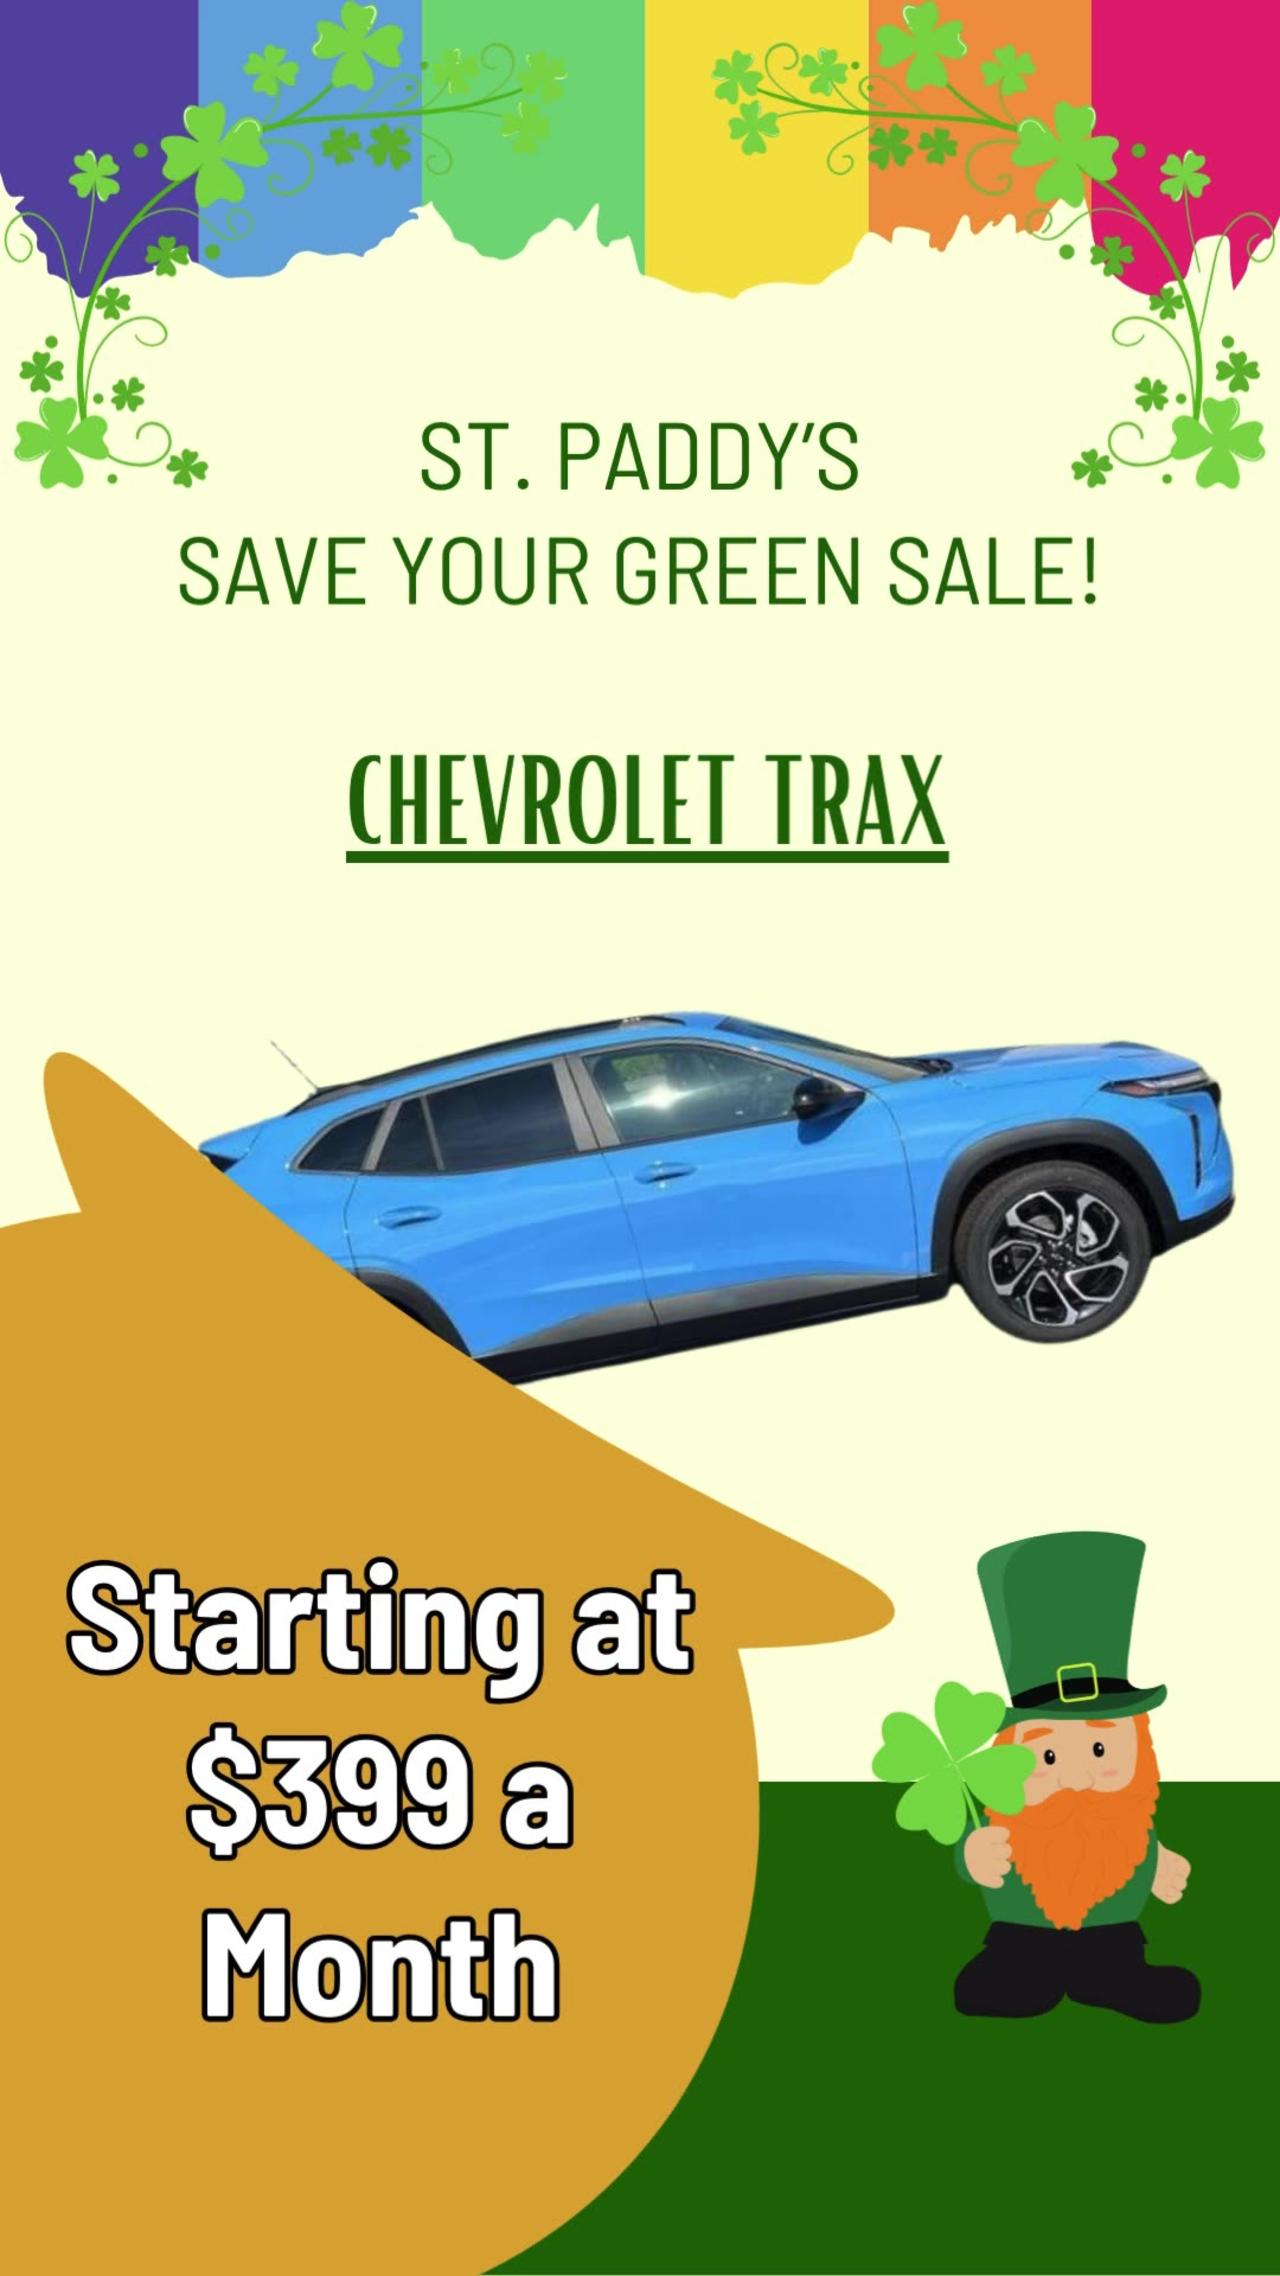 ST. PADDY’S SAVE YOUR GREEN SALE!